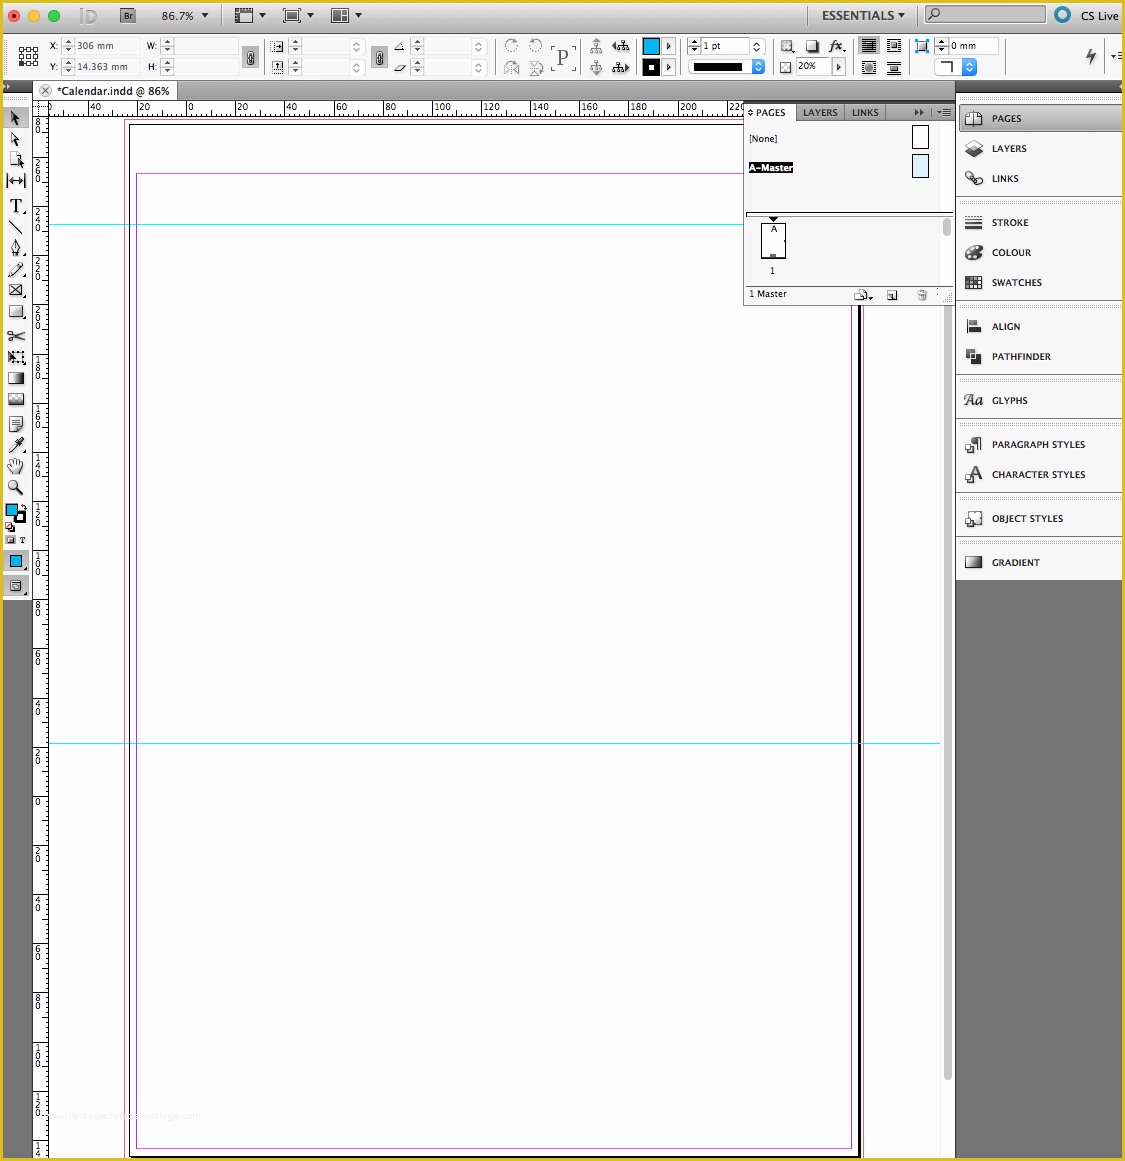 Indesign Planner Template Free Of Corporate Calendar In Indesign Incl Template Saxoprint